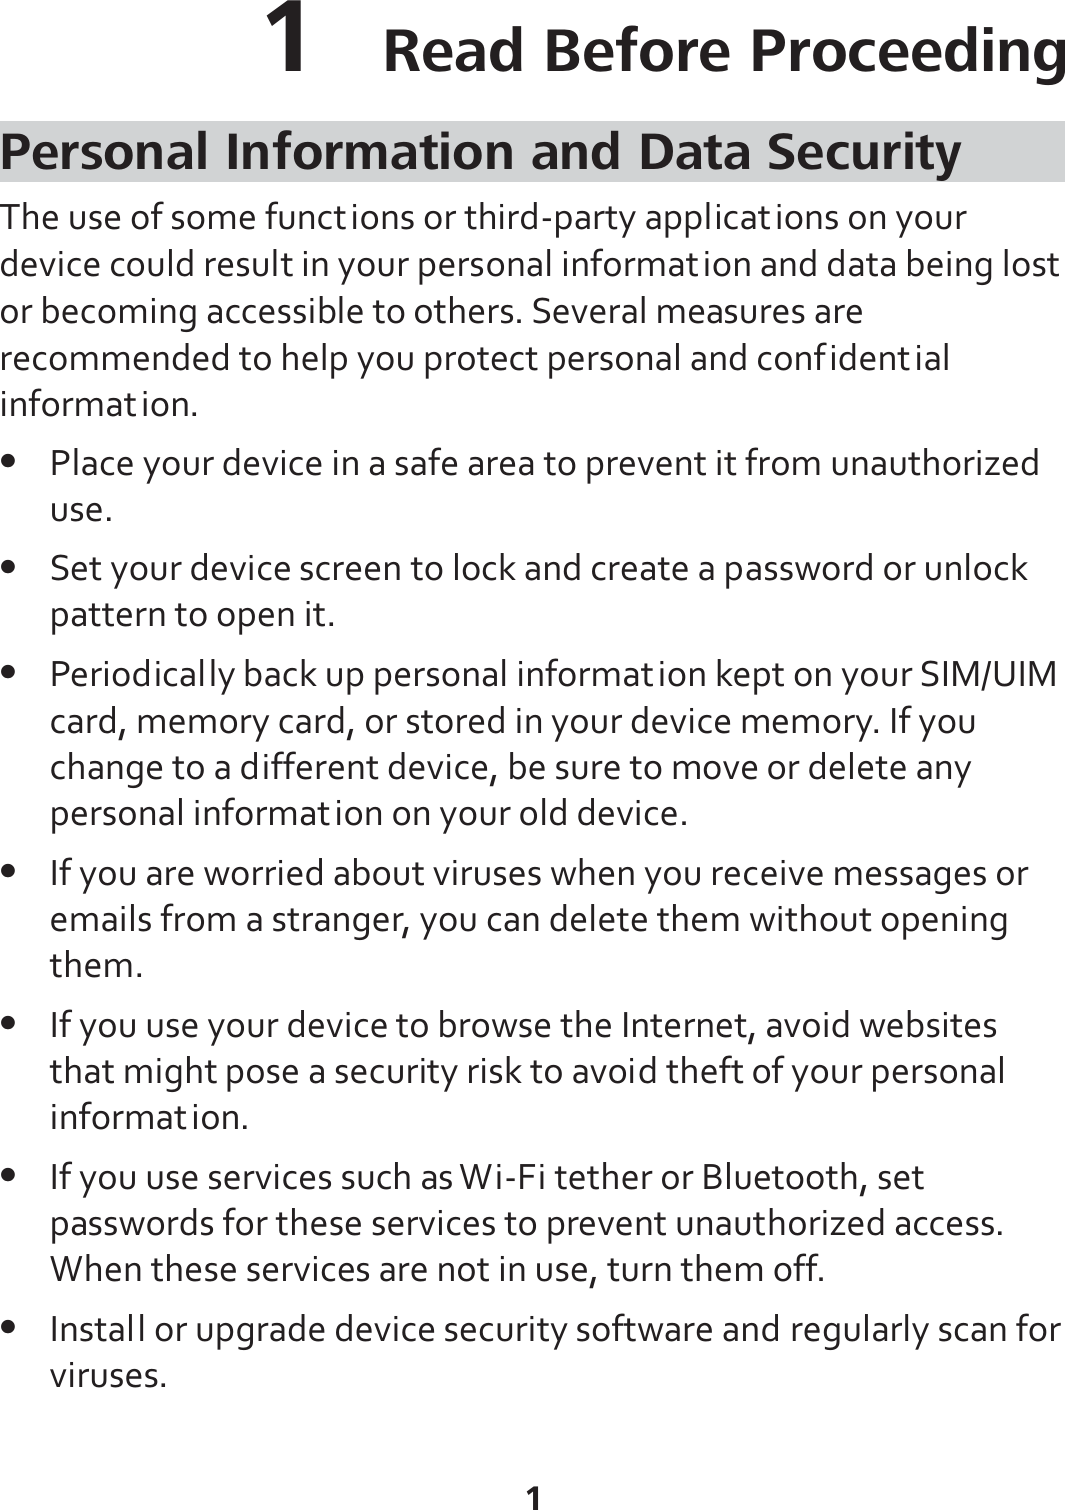 1 1  Read Before Proceeding Personal Information and Data Security The use of some functions or third-party applications on your device could result in your personal information and data being lost or becoming accessible to others. Several measures are recommended to help you protect personal and confidential information. z Place your device in a safe area to prevent it from unauthorized use. z Set your device screen to lock and create a password or unlock pattern to open it. z Periodically back up personal information kept on your SIM/UIM card, memory card, or stored in your device memory. If you change to a different device, be sure to move or delete any personal information on your old device. z If you are worried about viruses when you receive messages or emails from a stranger, you can delete them without opening them. z If you use your device to browse the Internet, avoid websites that might pose a security risk to avoid theft of your personal information. z If you use services such as Wi-Fi tether or Bluetooth, set passwords for these services to prevent unauthorized access. When these services are not in use, turn them off. z Install or upgrade device security software and regularly scan for viruses. 